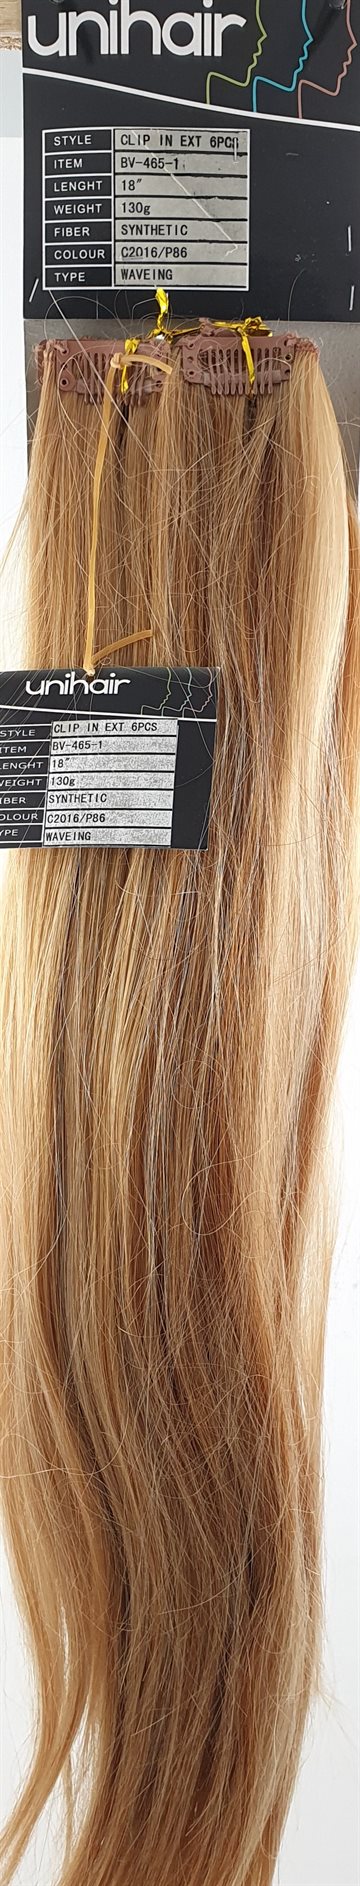 Synthetic Silky straight Clips on hair color C 2016/P86 Clip in Extention 6 pcs 130gr.